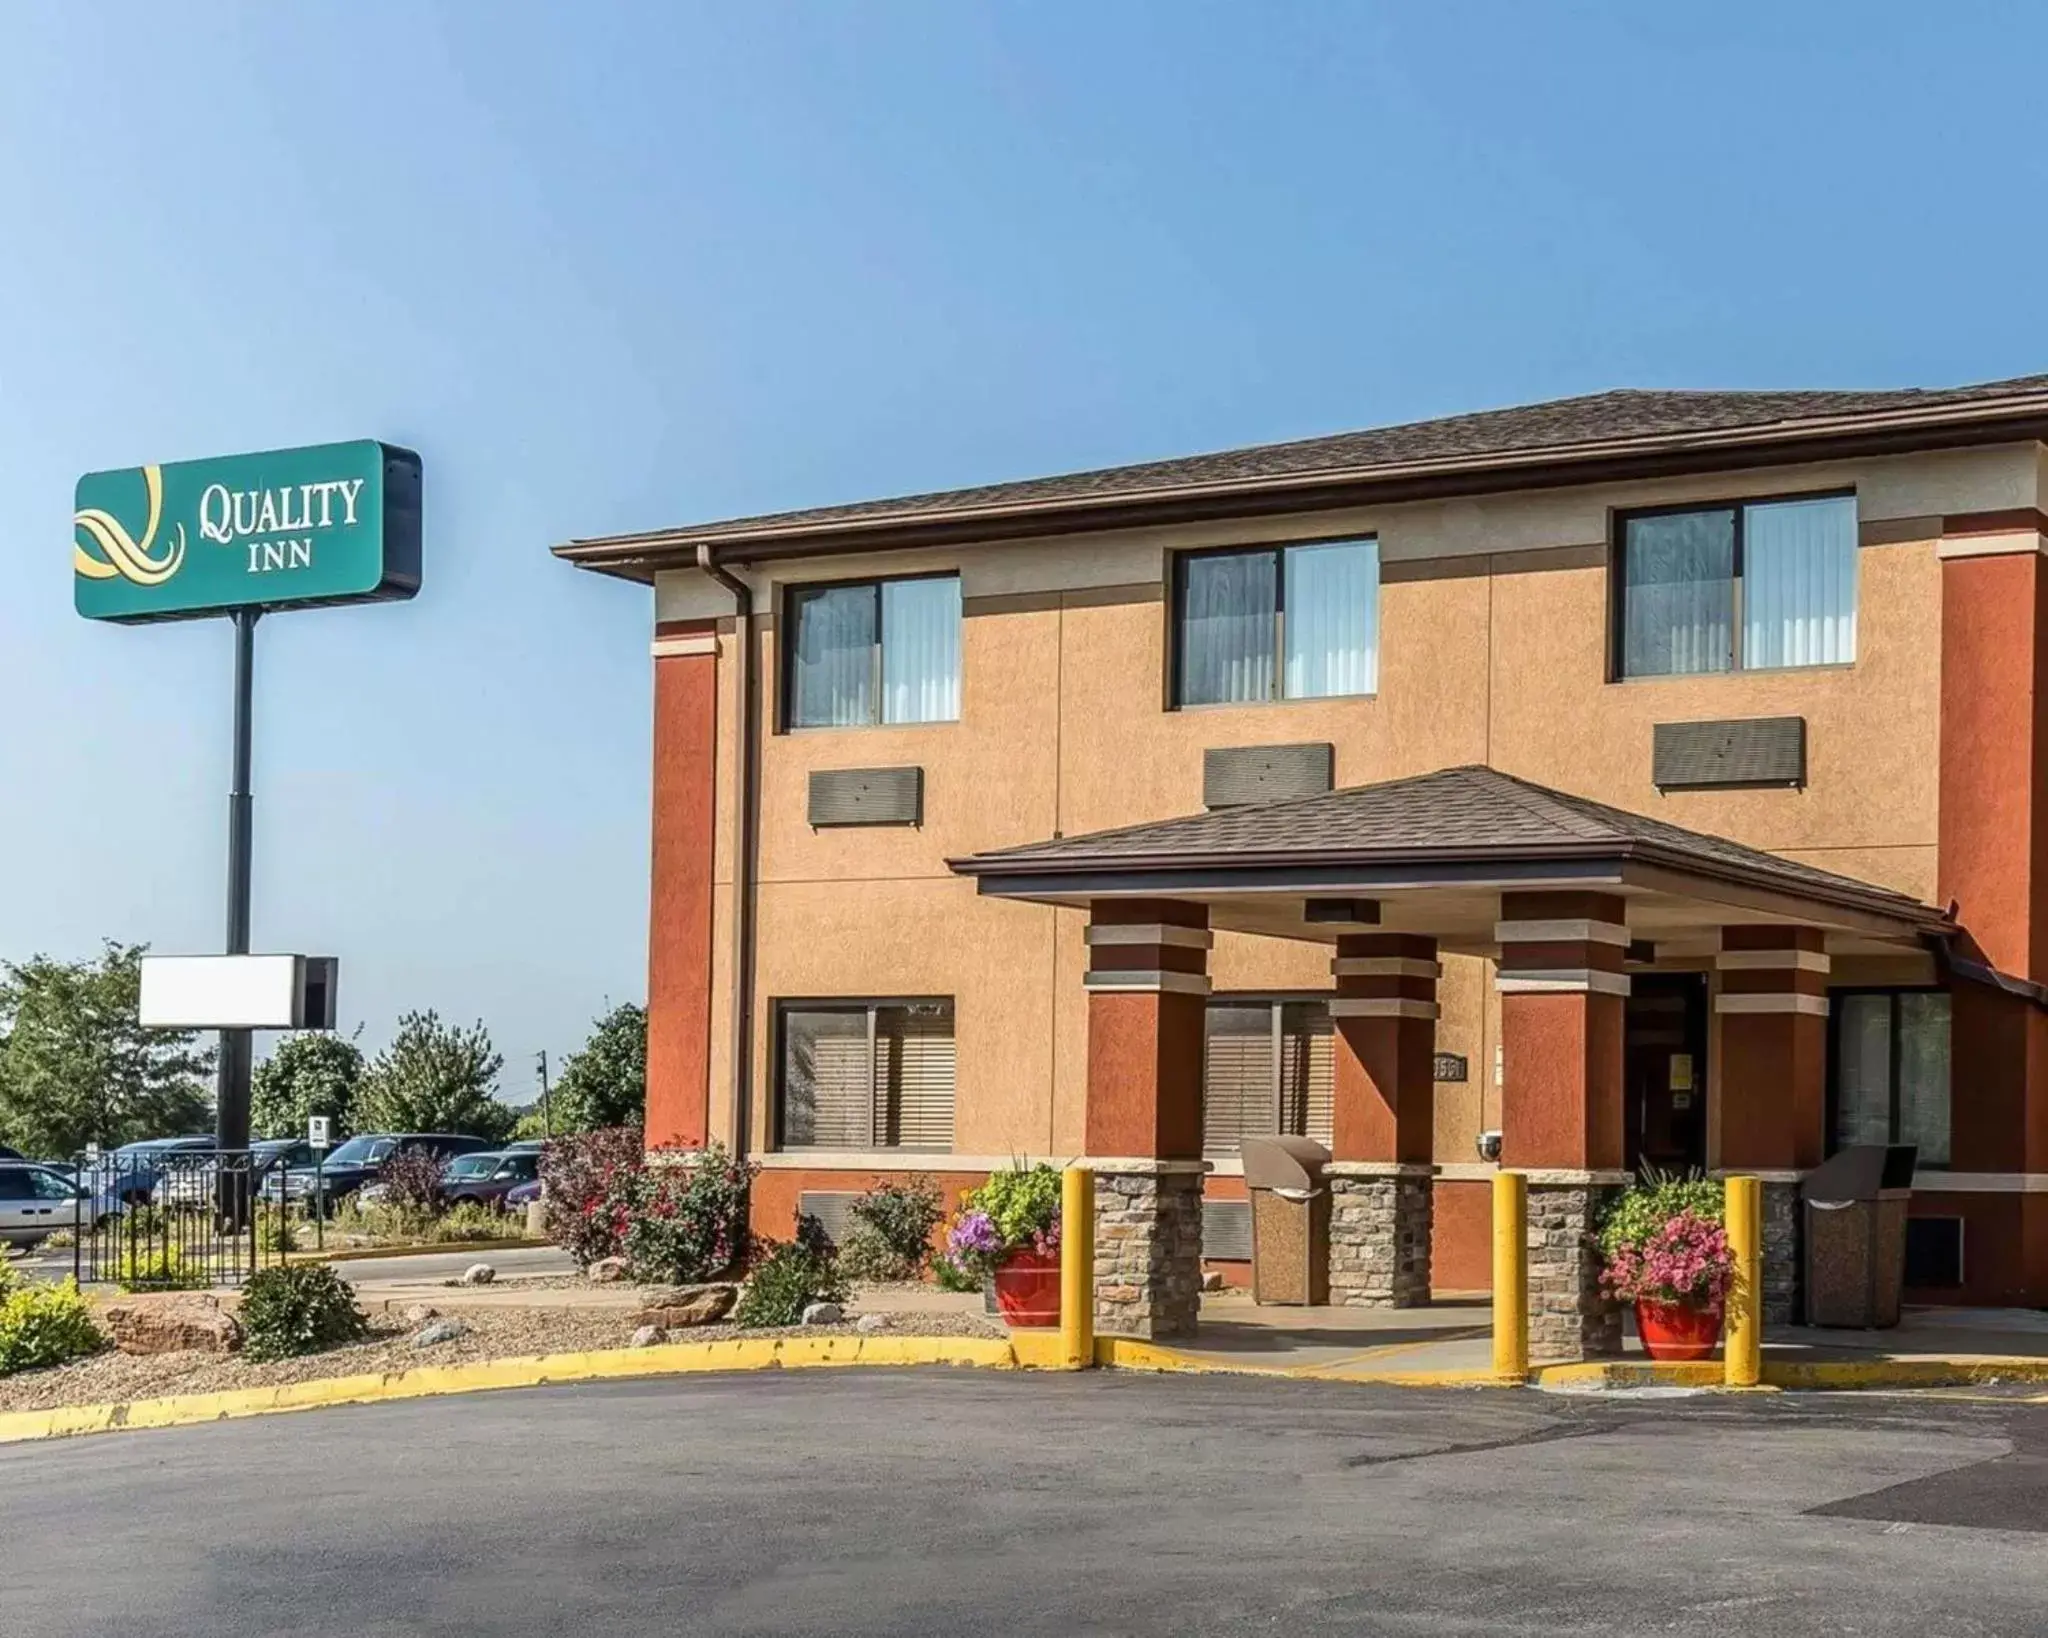 Property building in Quality Inn at Collins Road - Cedar Rapids